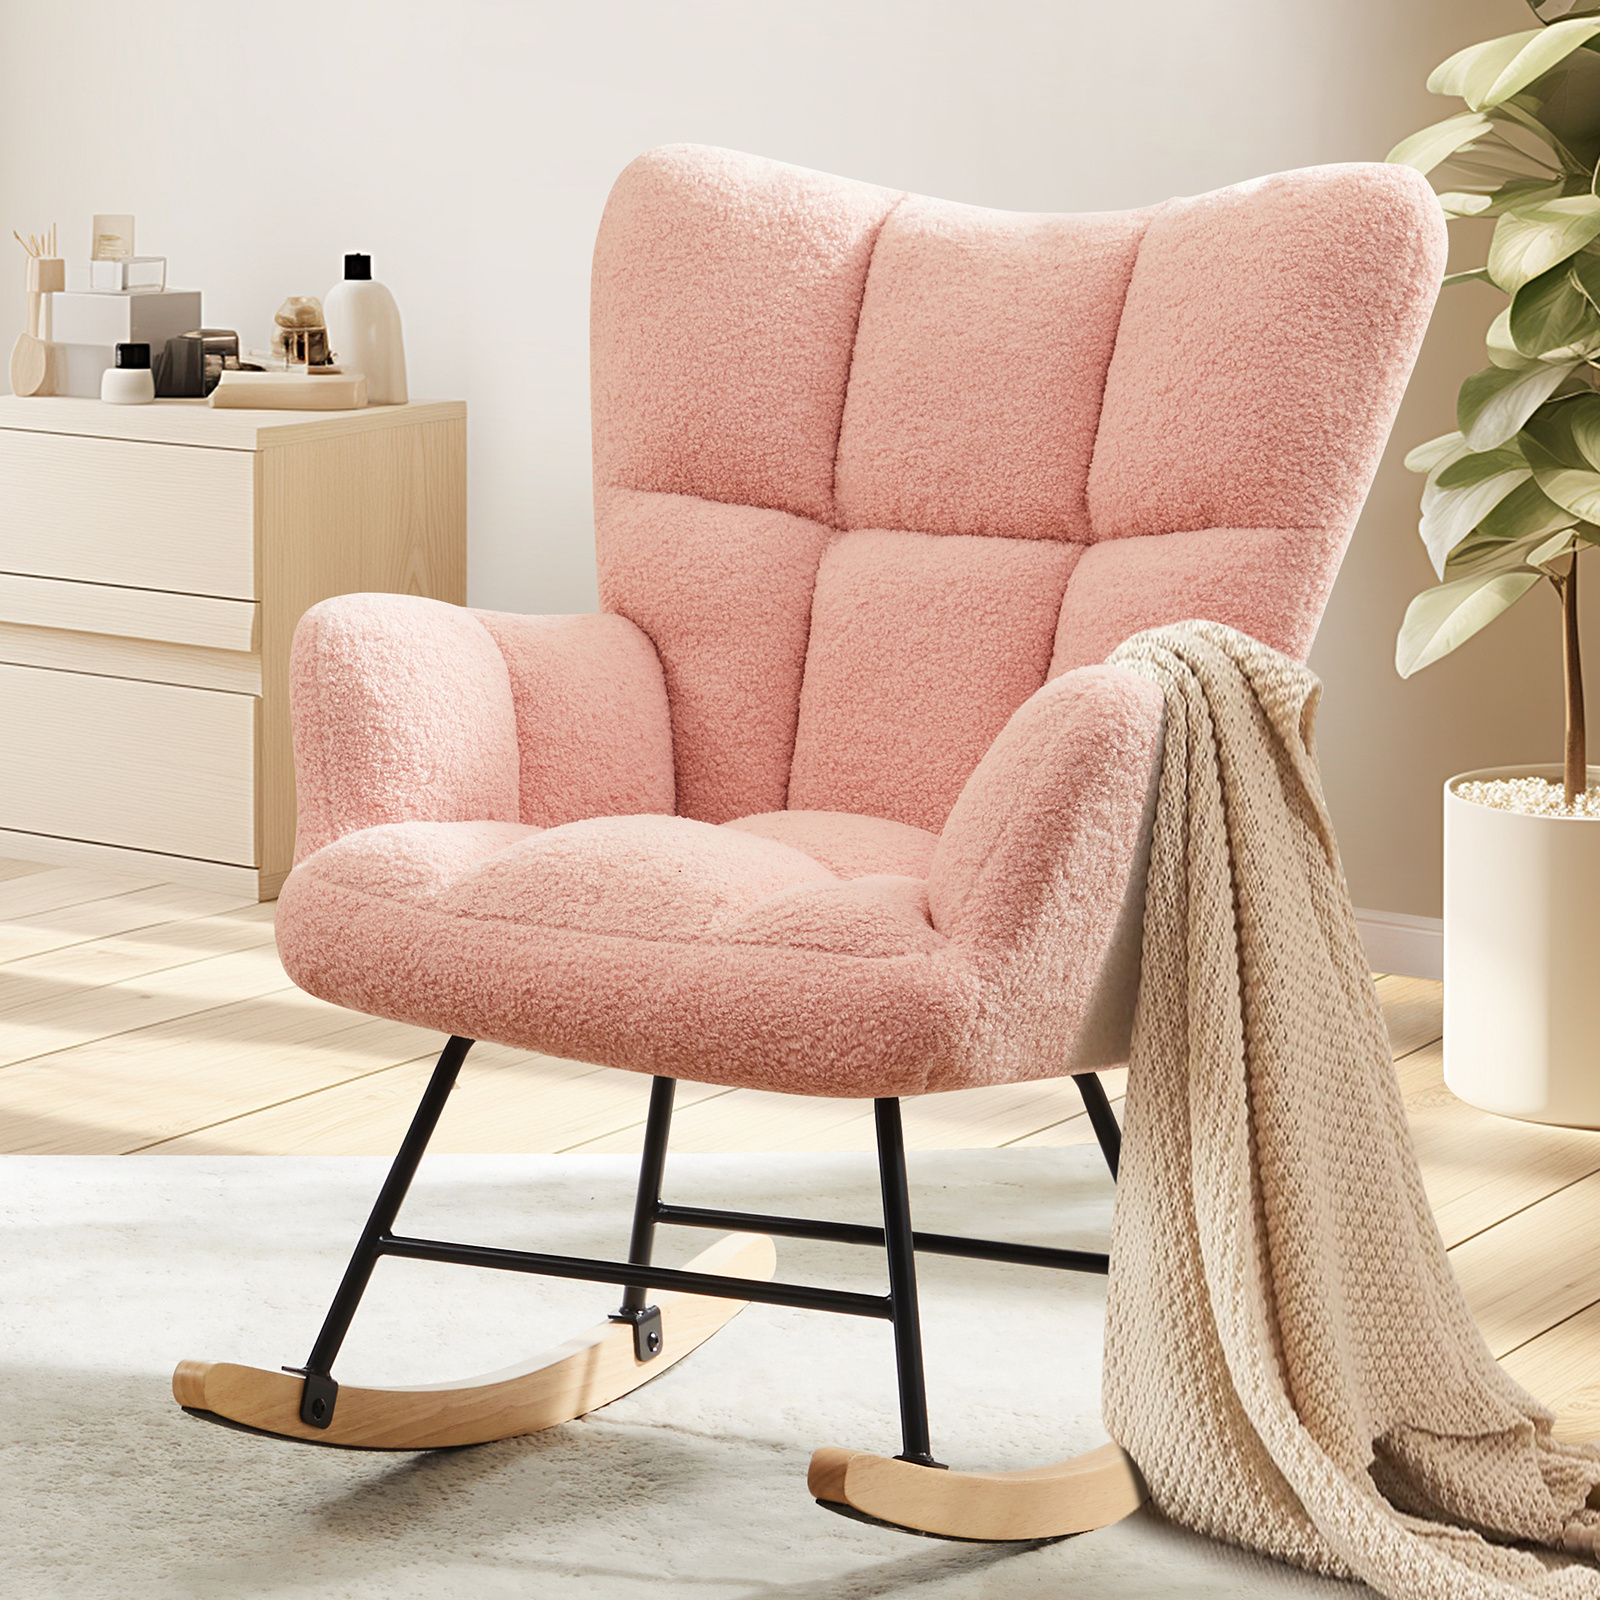 

Rocking Chair Teddy Upholstered Glider Rocker Rocking Accent Chair Padded Seat With High Backrest Armchair Comfy Side Chair For Living Room Bedroom Offices